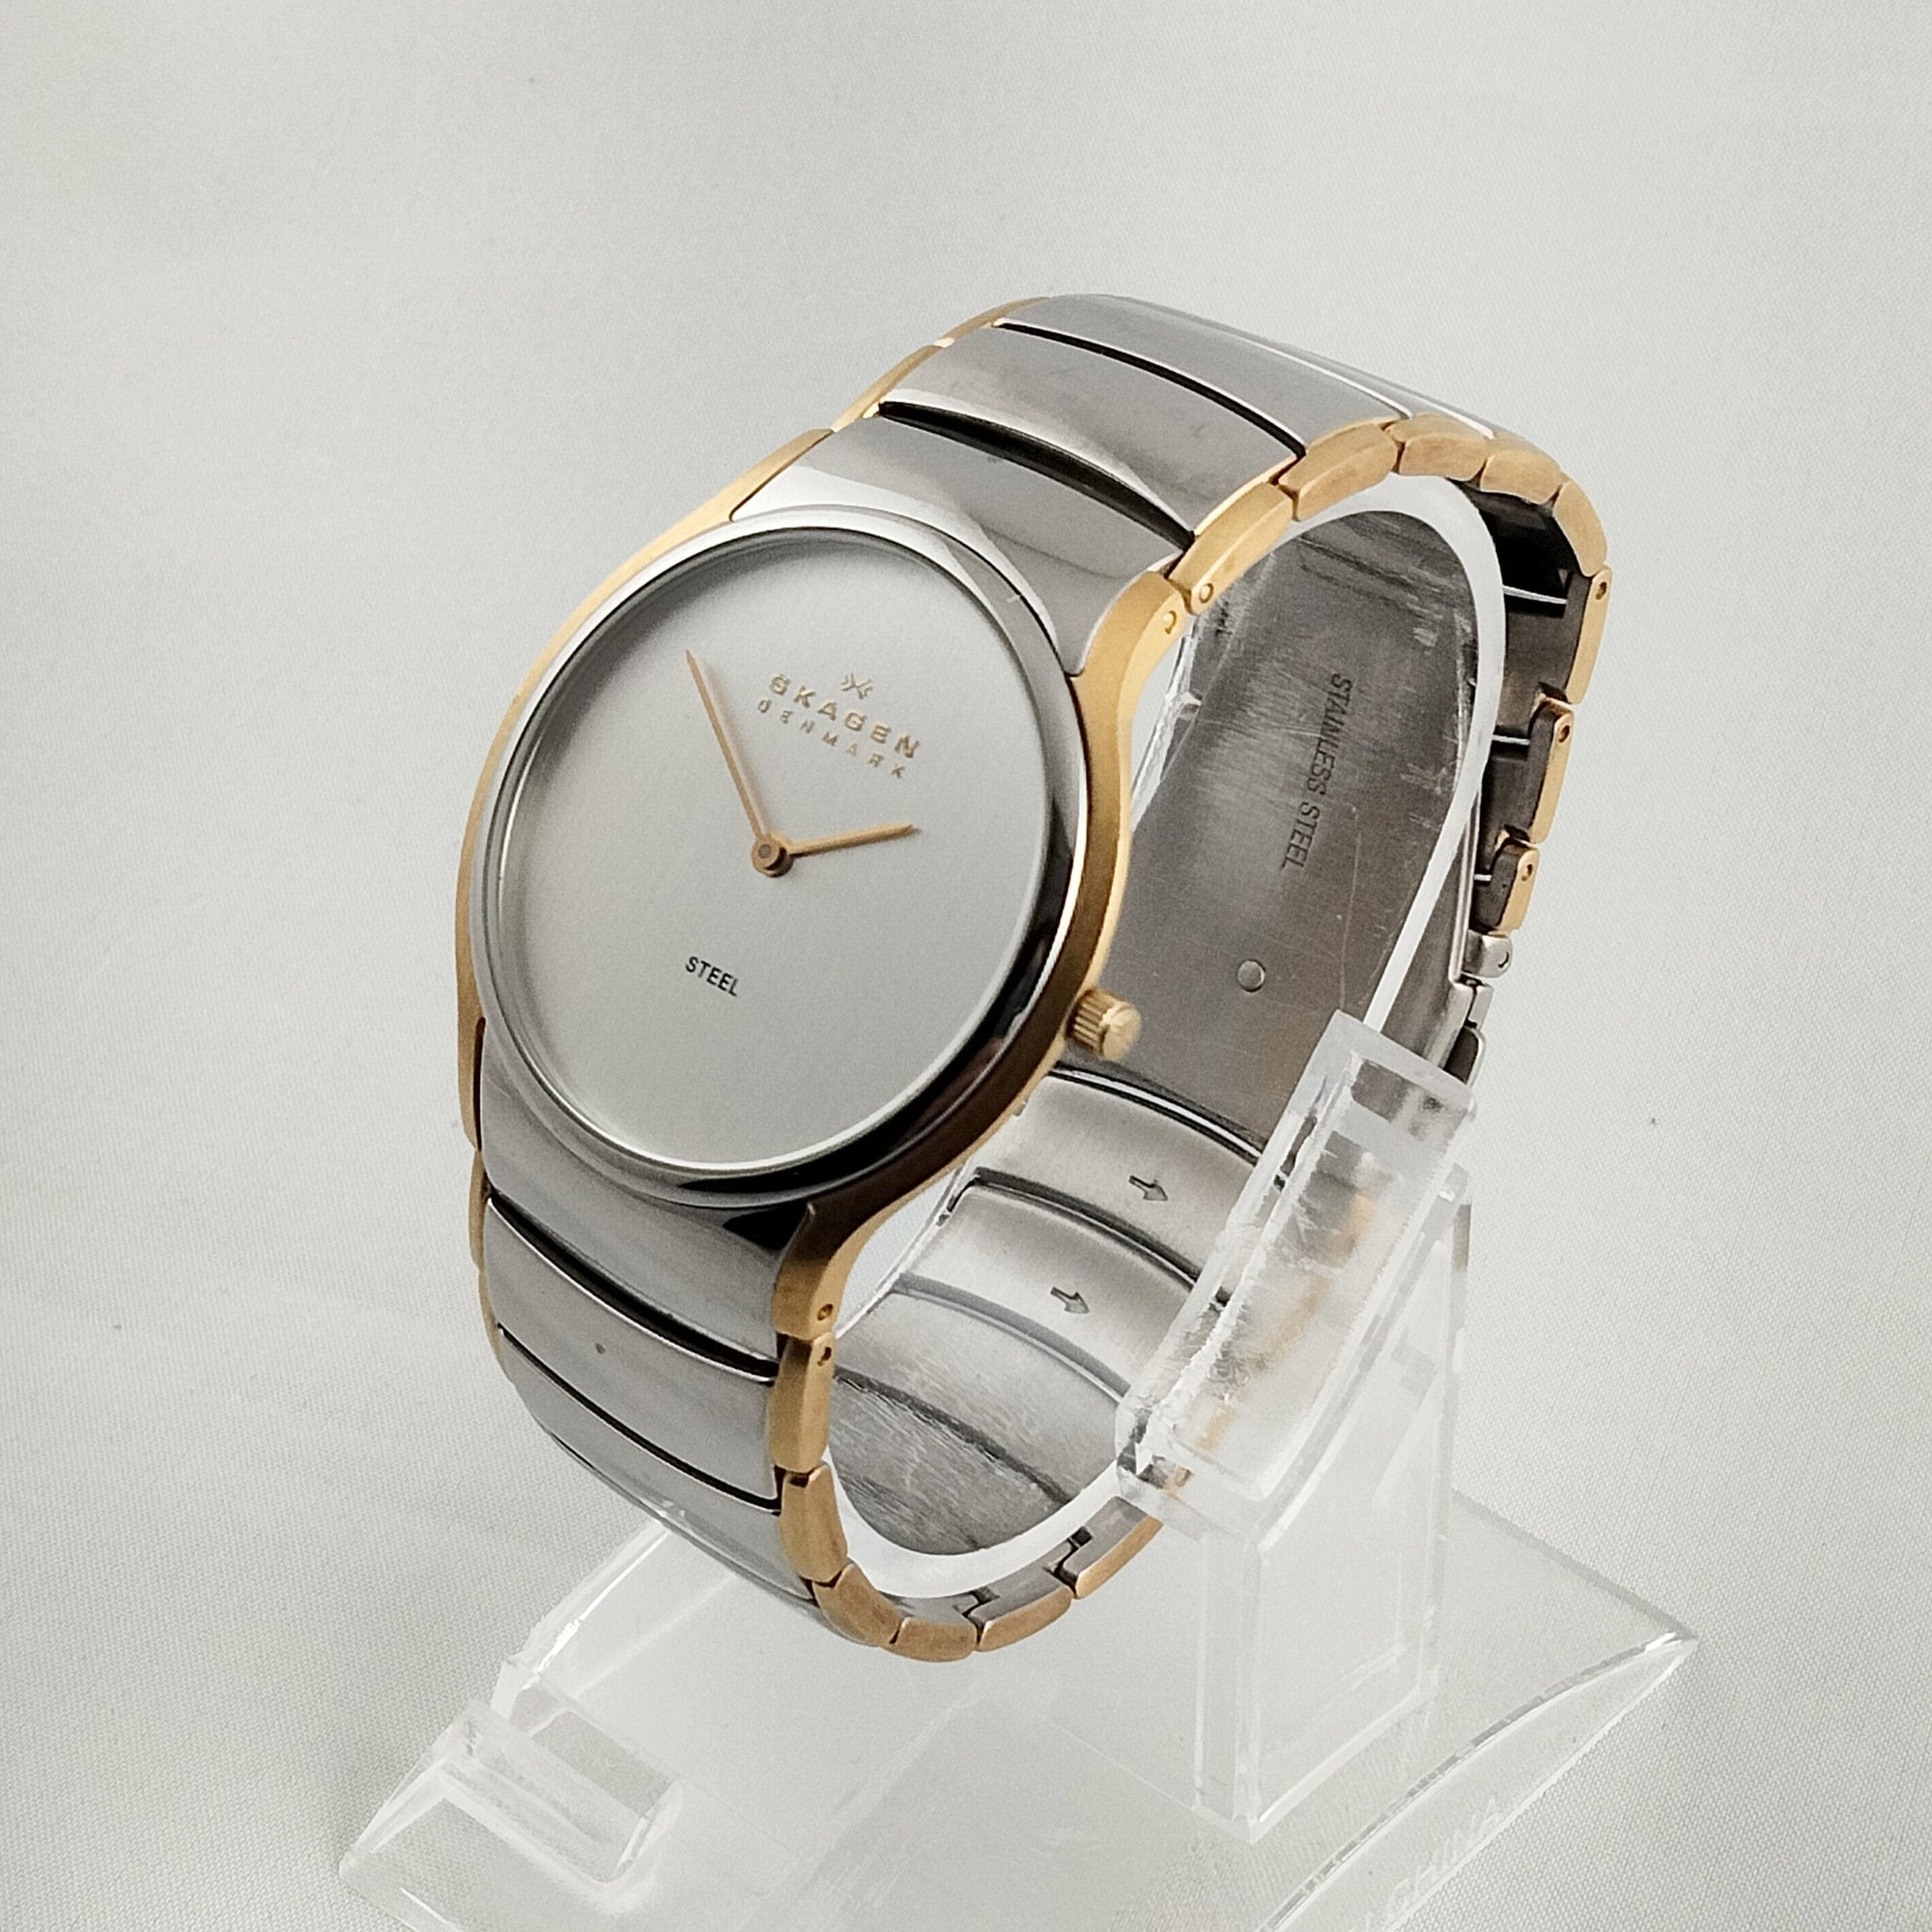 I Like Mikes Mid Century Modern Watches Skagen Men's Oversized Stainless Steel Watch with Gold Tone Details